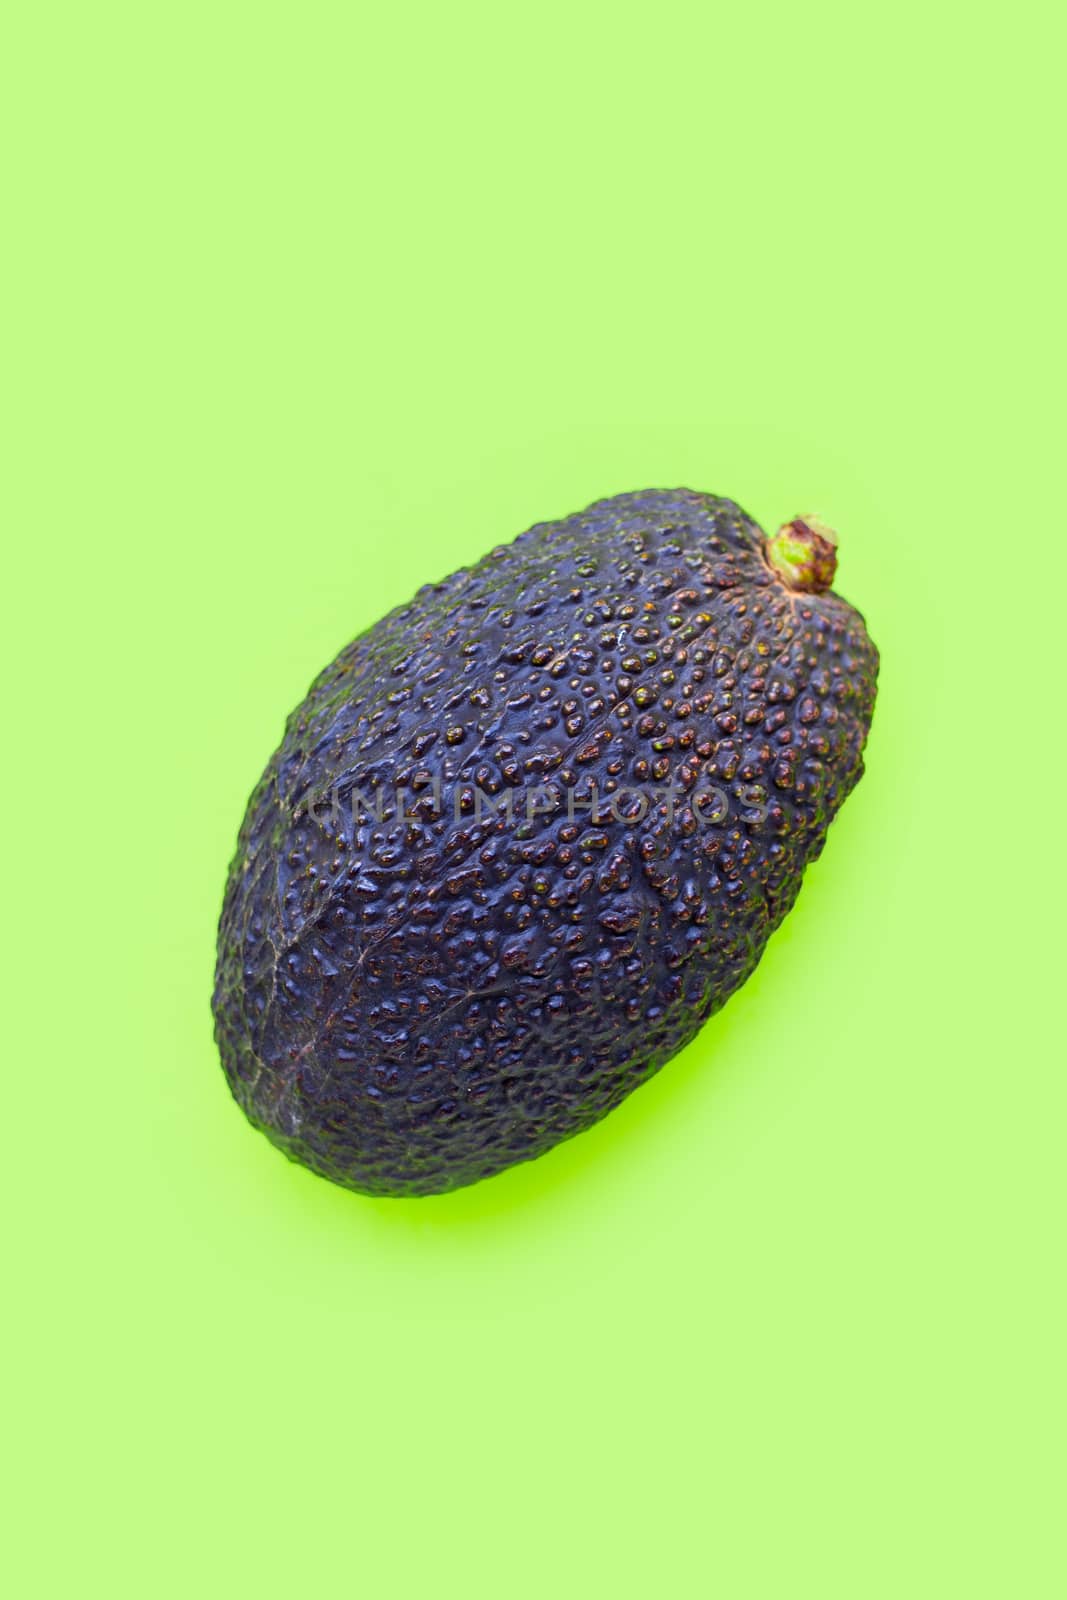 Avocado on green background. Top view